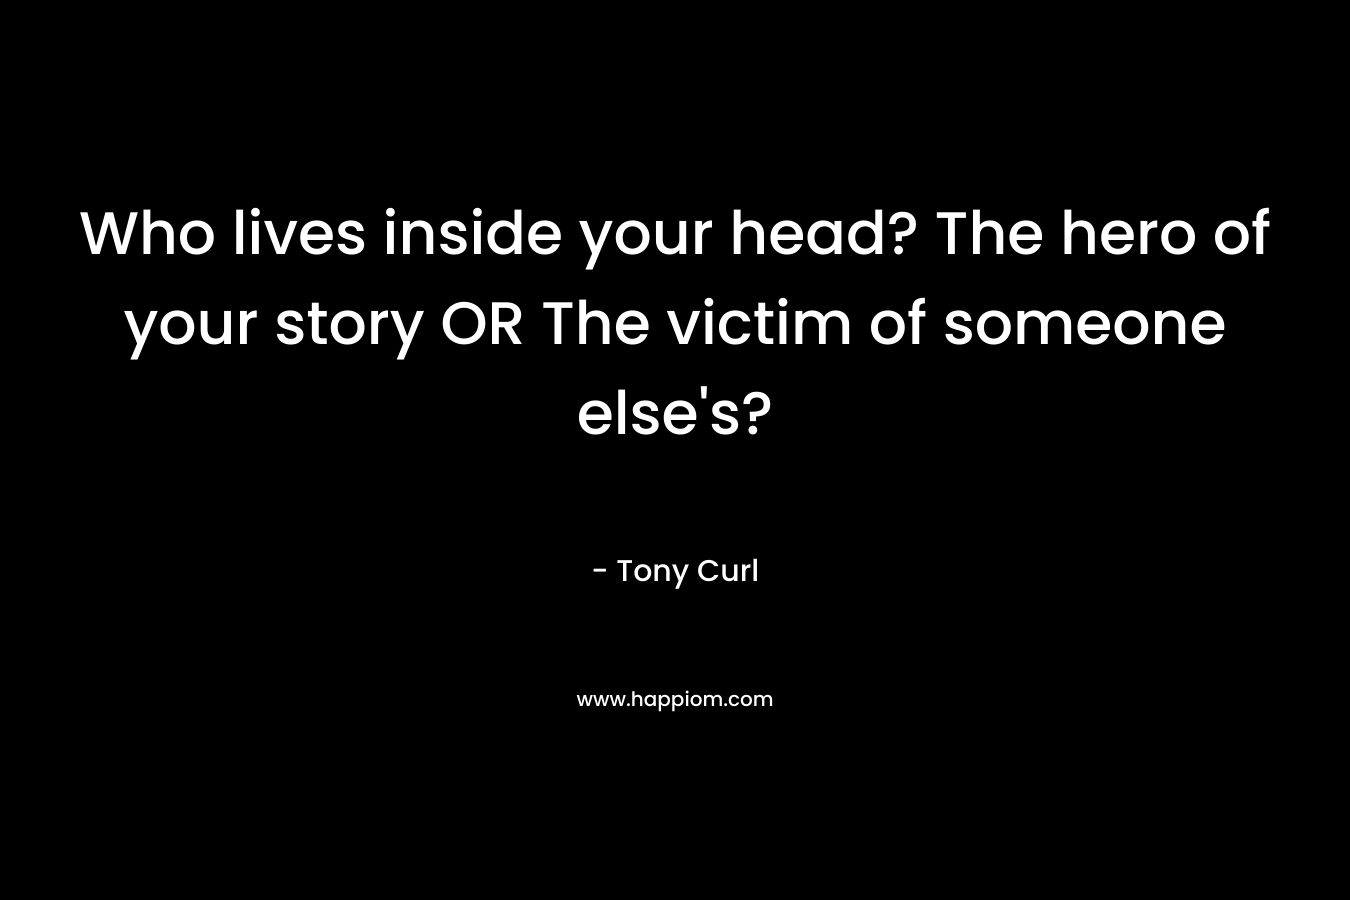 Who lives inside your head? The hero of your story OR The victim of someone else’s? – Tony Curl